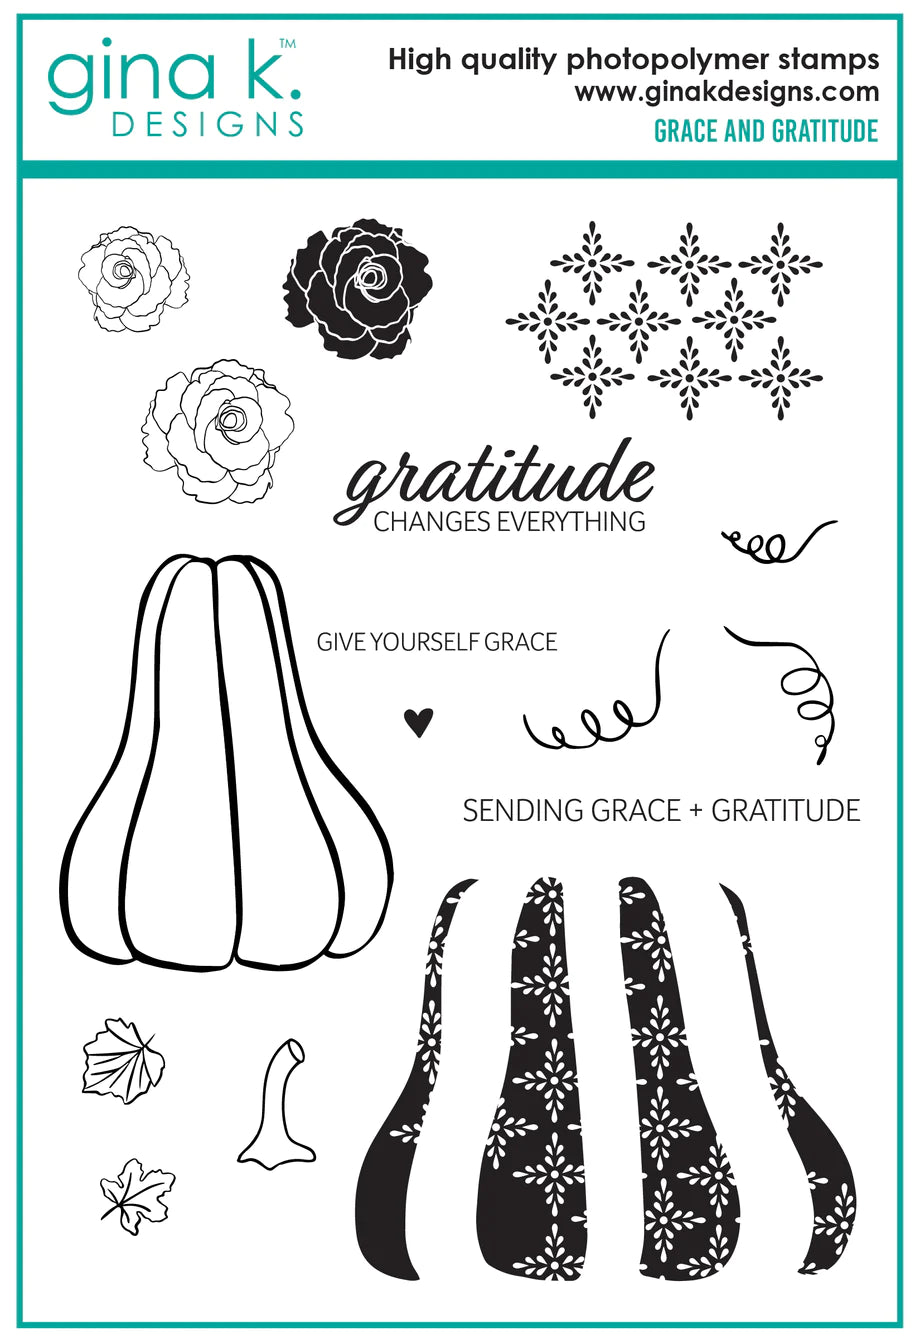 Gina K. Designs - Stamp & Die Set - Grace and Gratitude. Grace and Gratitude is a stamp & die set by Lisa Hetrick. This set is made of premium clear photopolymer and measures 6